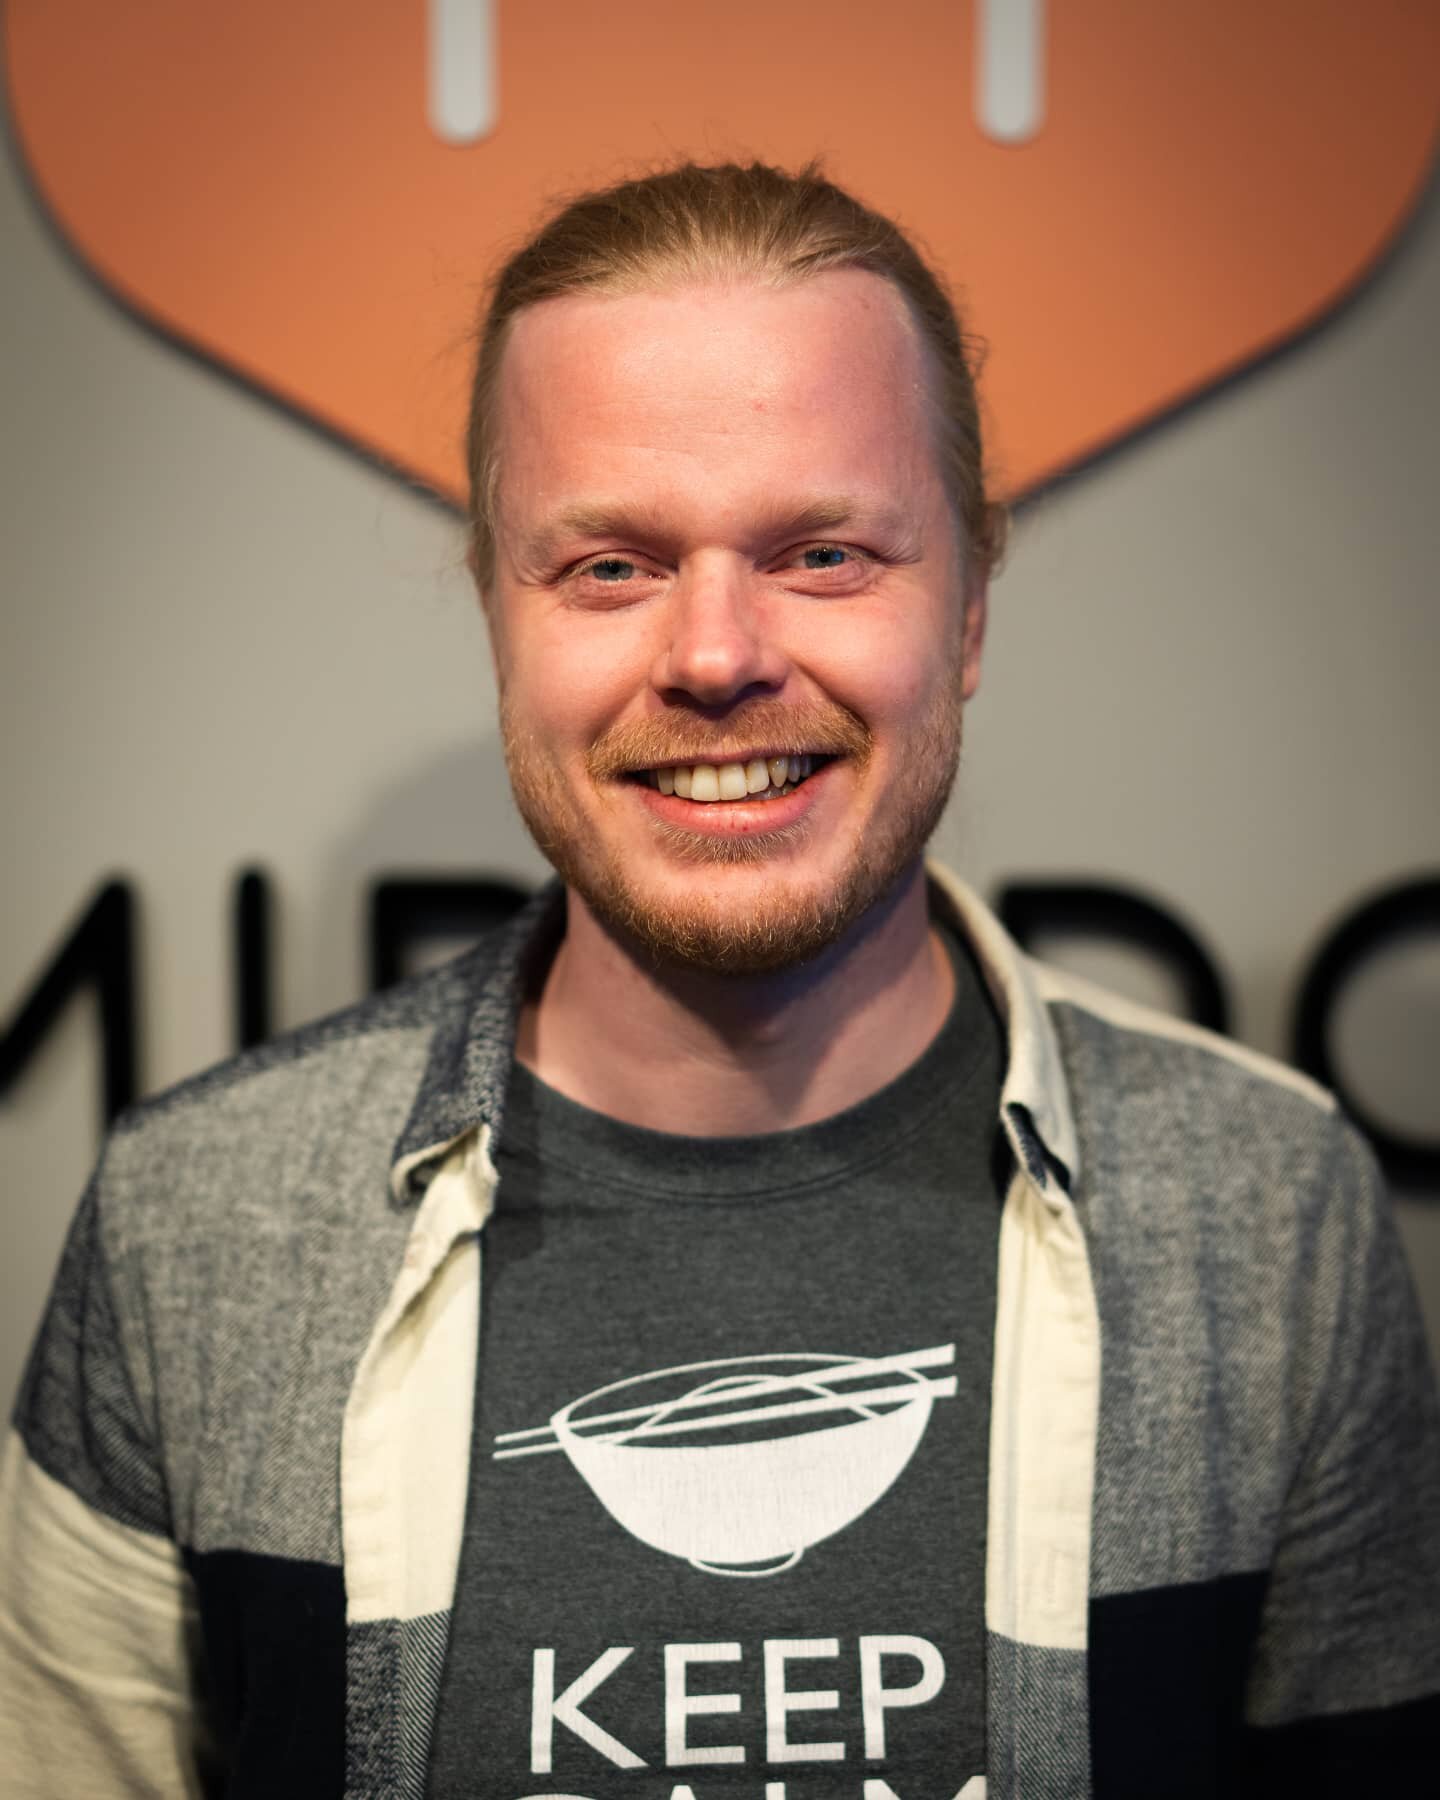 We are so happy to welcome Emil Sahl&eacute;n to Mirado!🥳

Emil has extensive experience with C++/ Java development from the streaming industry and is now looking to widen his horizon. Big Welcome!! 🌟